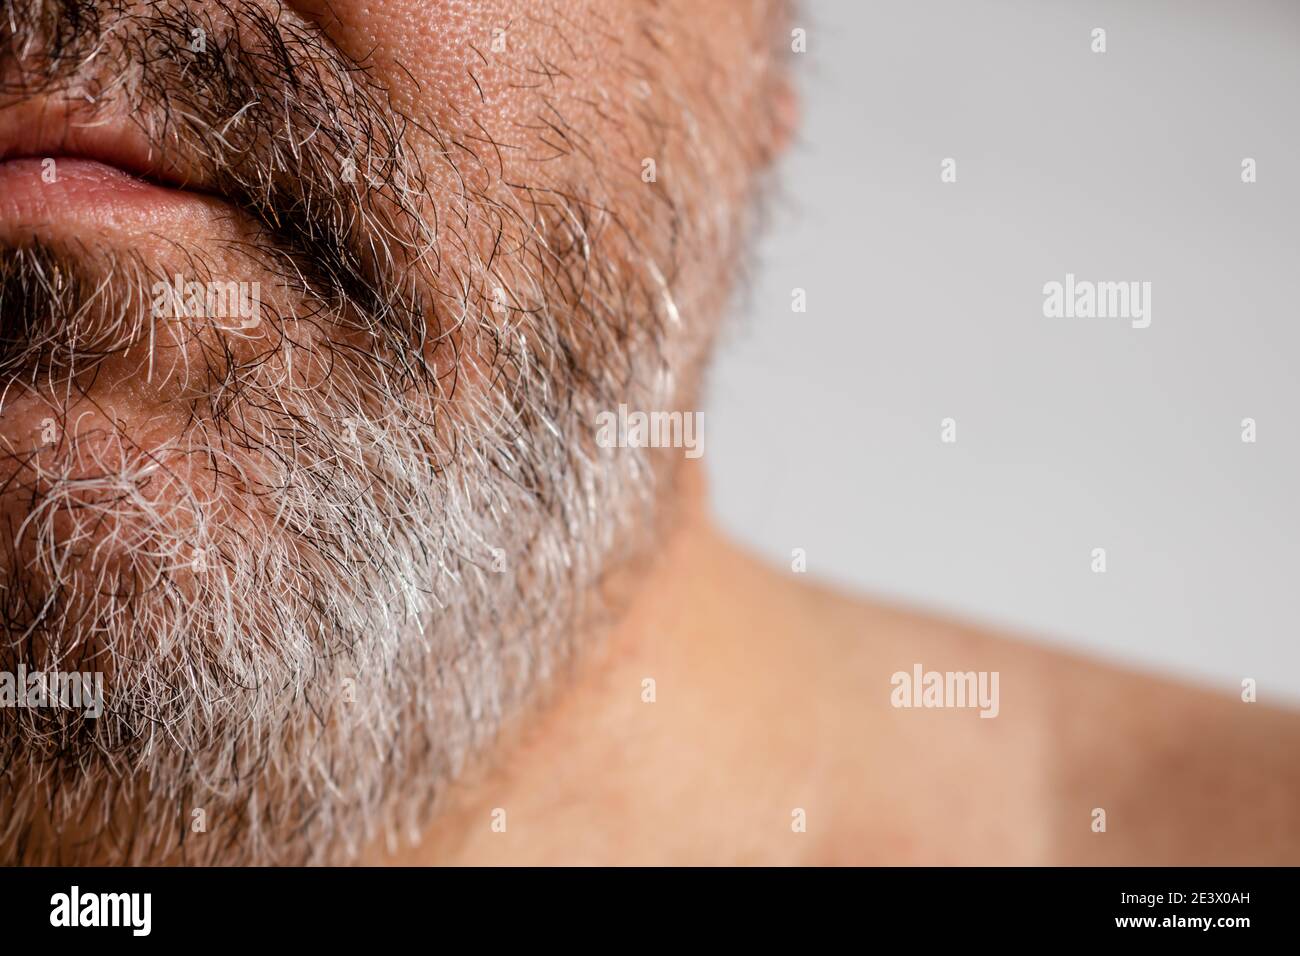 Stunted white, gray and black beard and mustache of a middle-aged man. Stock Photo